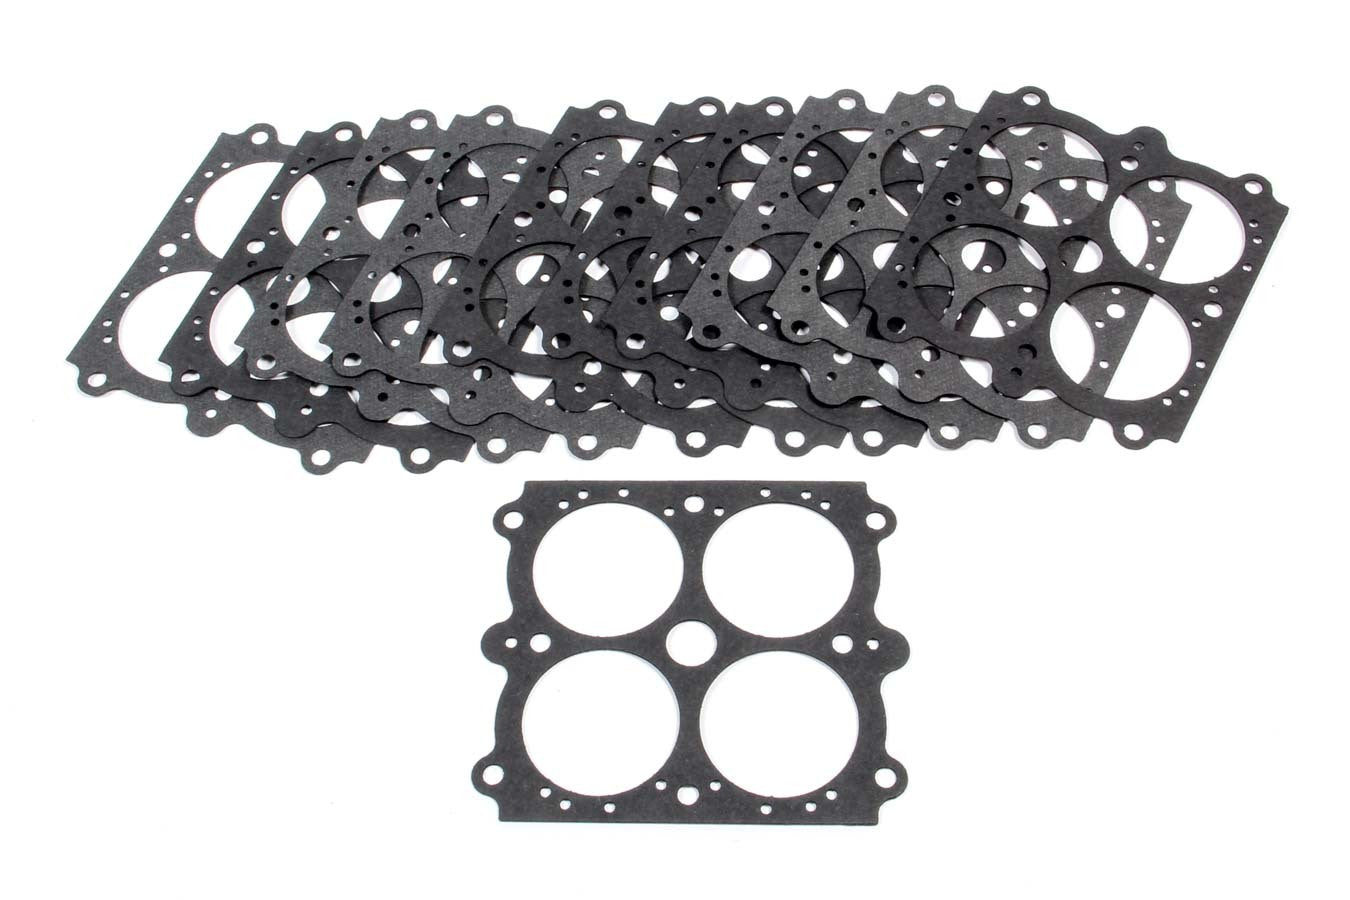 Advanced Engine Design Throttle Plate Gaskets (650-800) 10-pack AED6364X